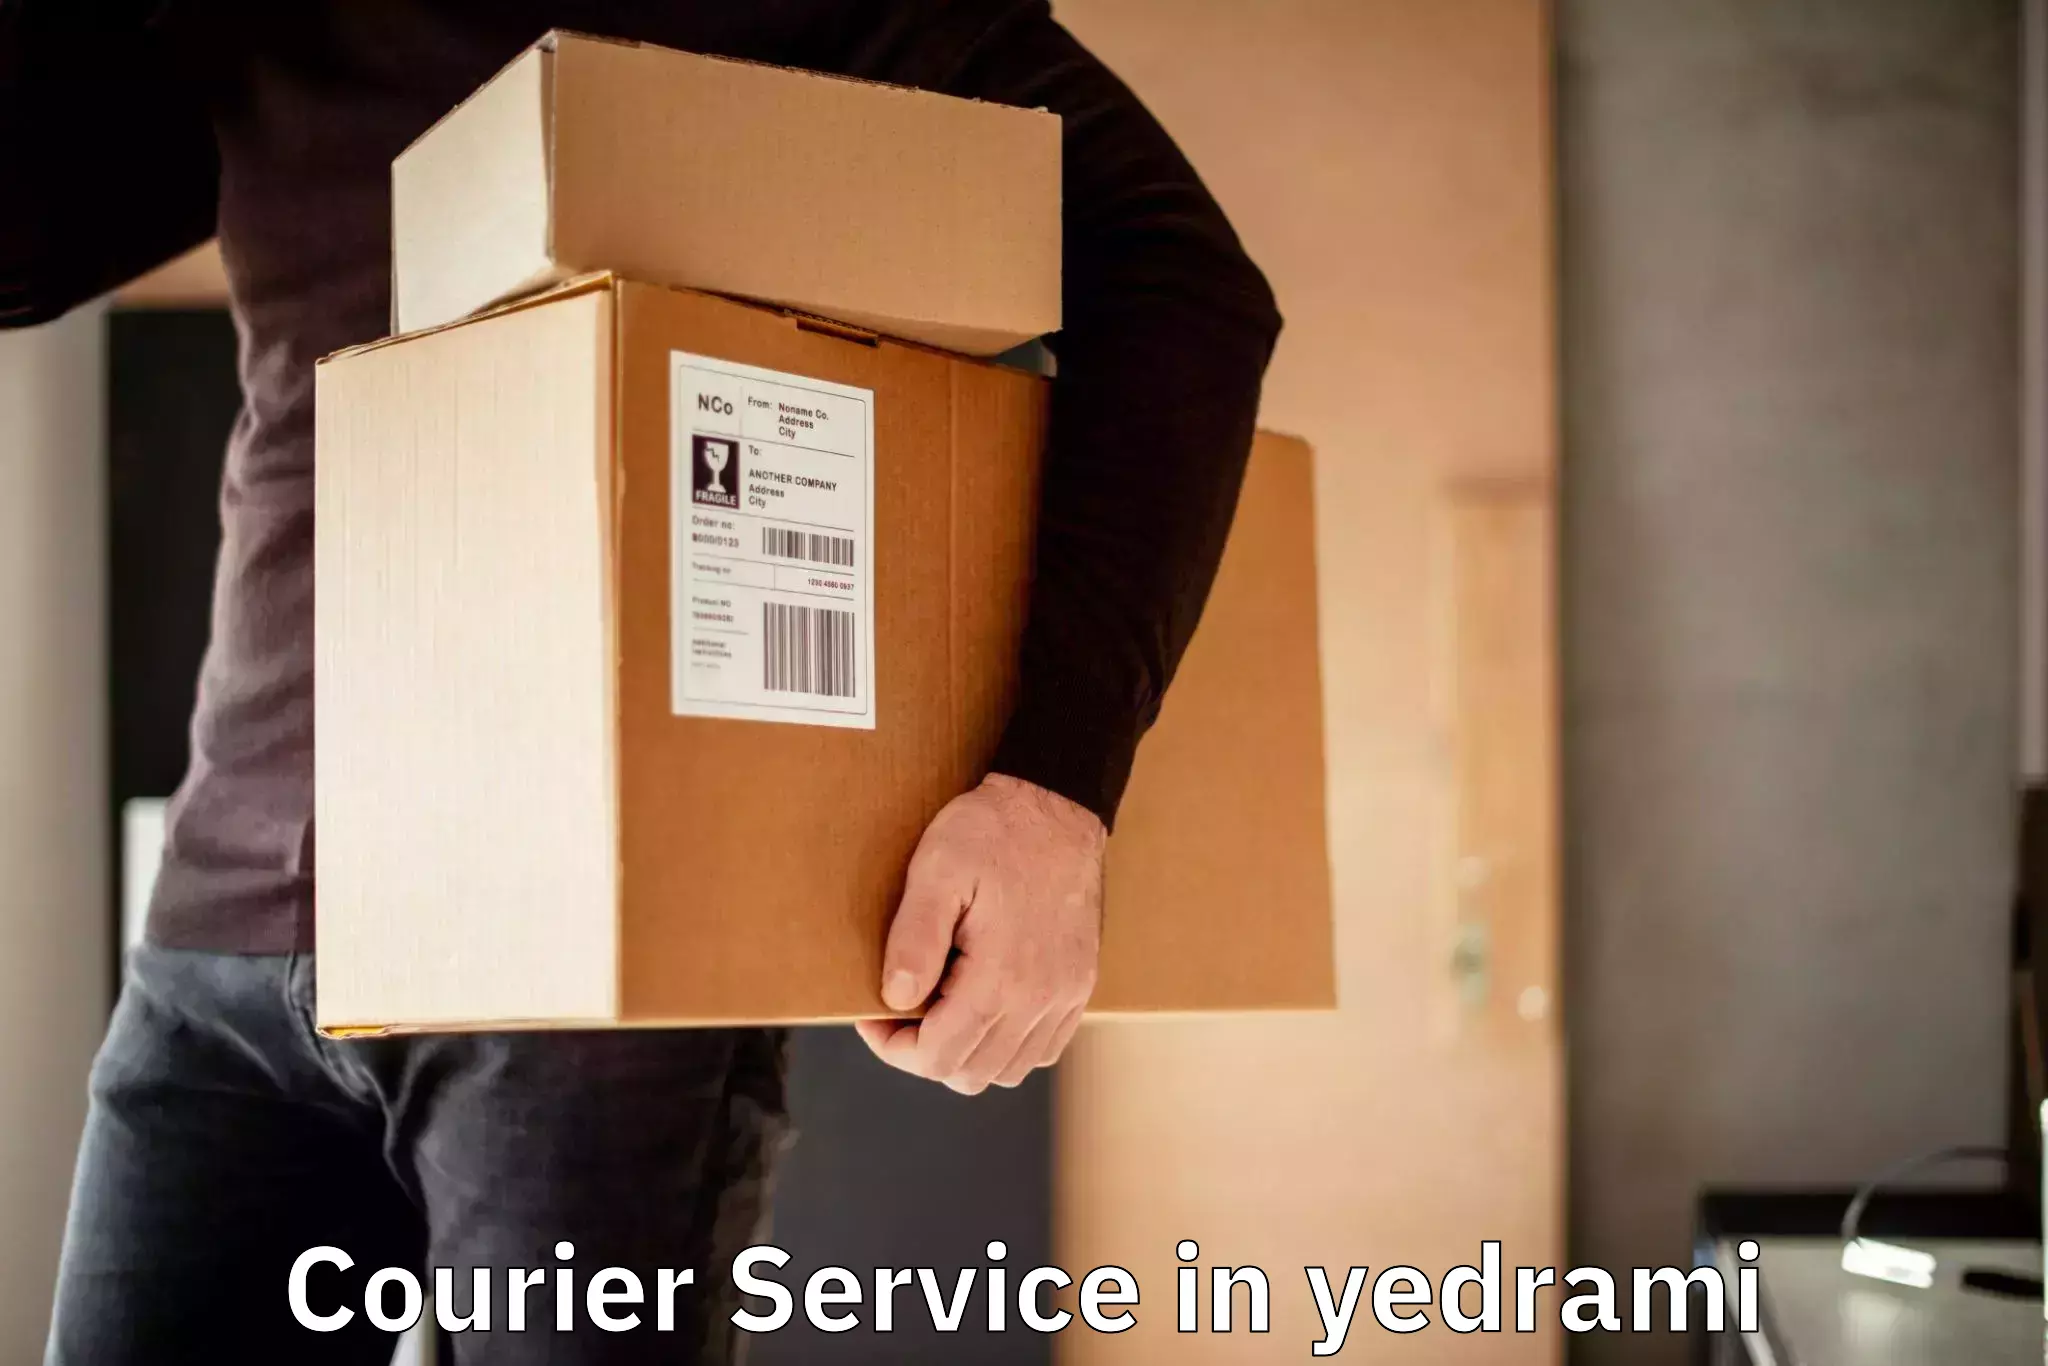 Pharmaceutical courier in yedrami